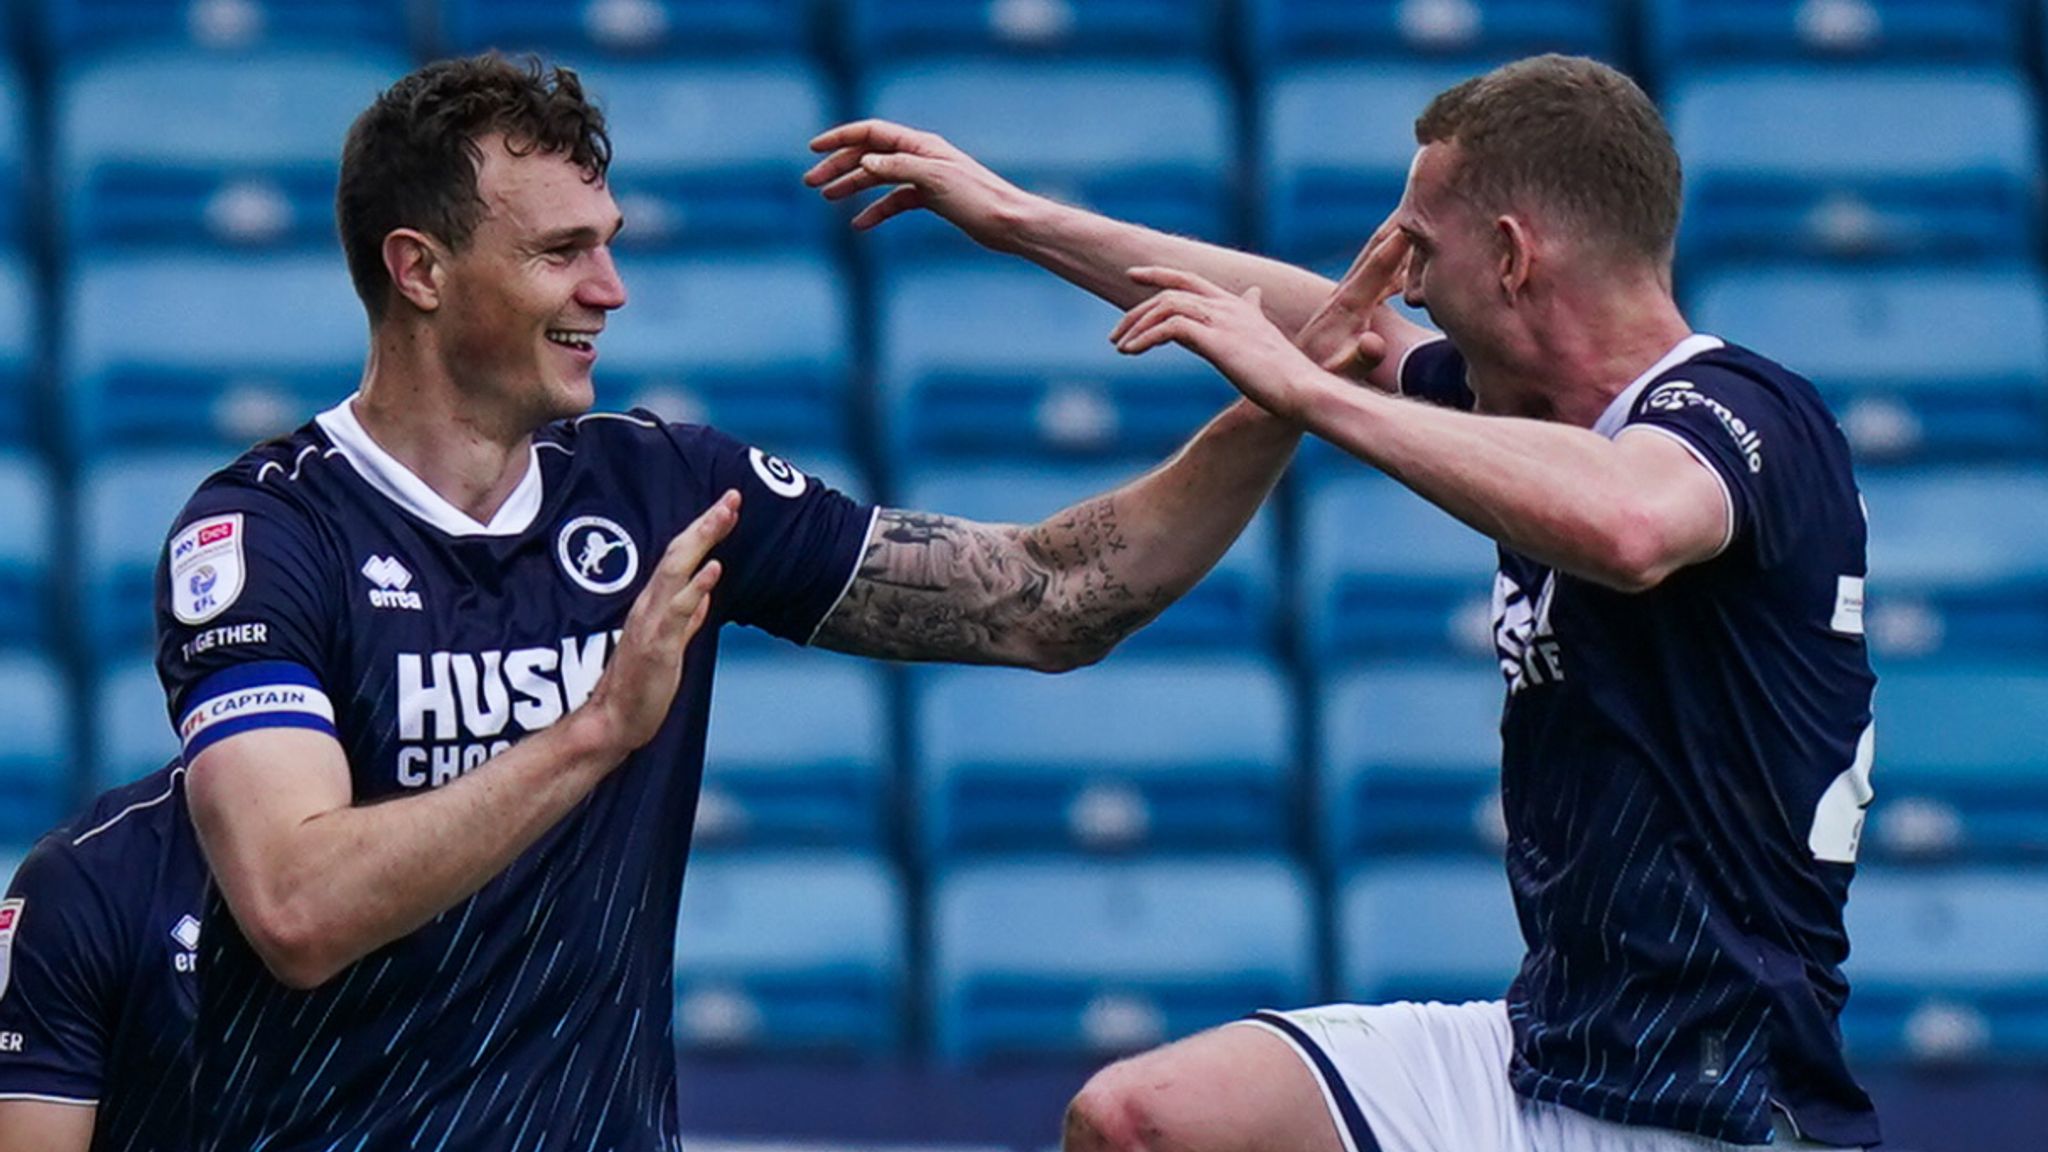 Millwall Roars to Victory: A 3-1 Thriller Over Cardiff!